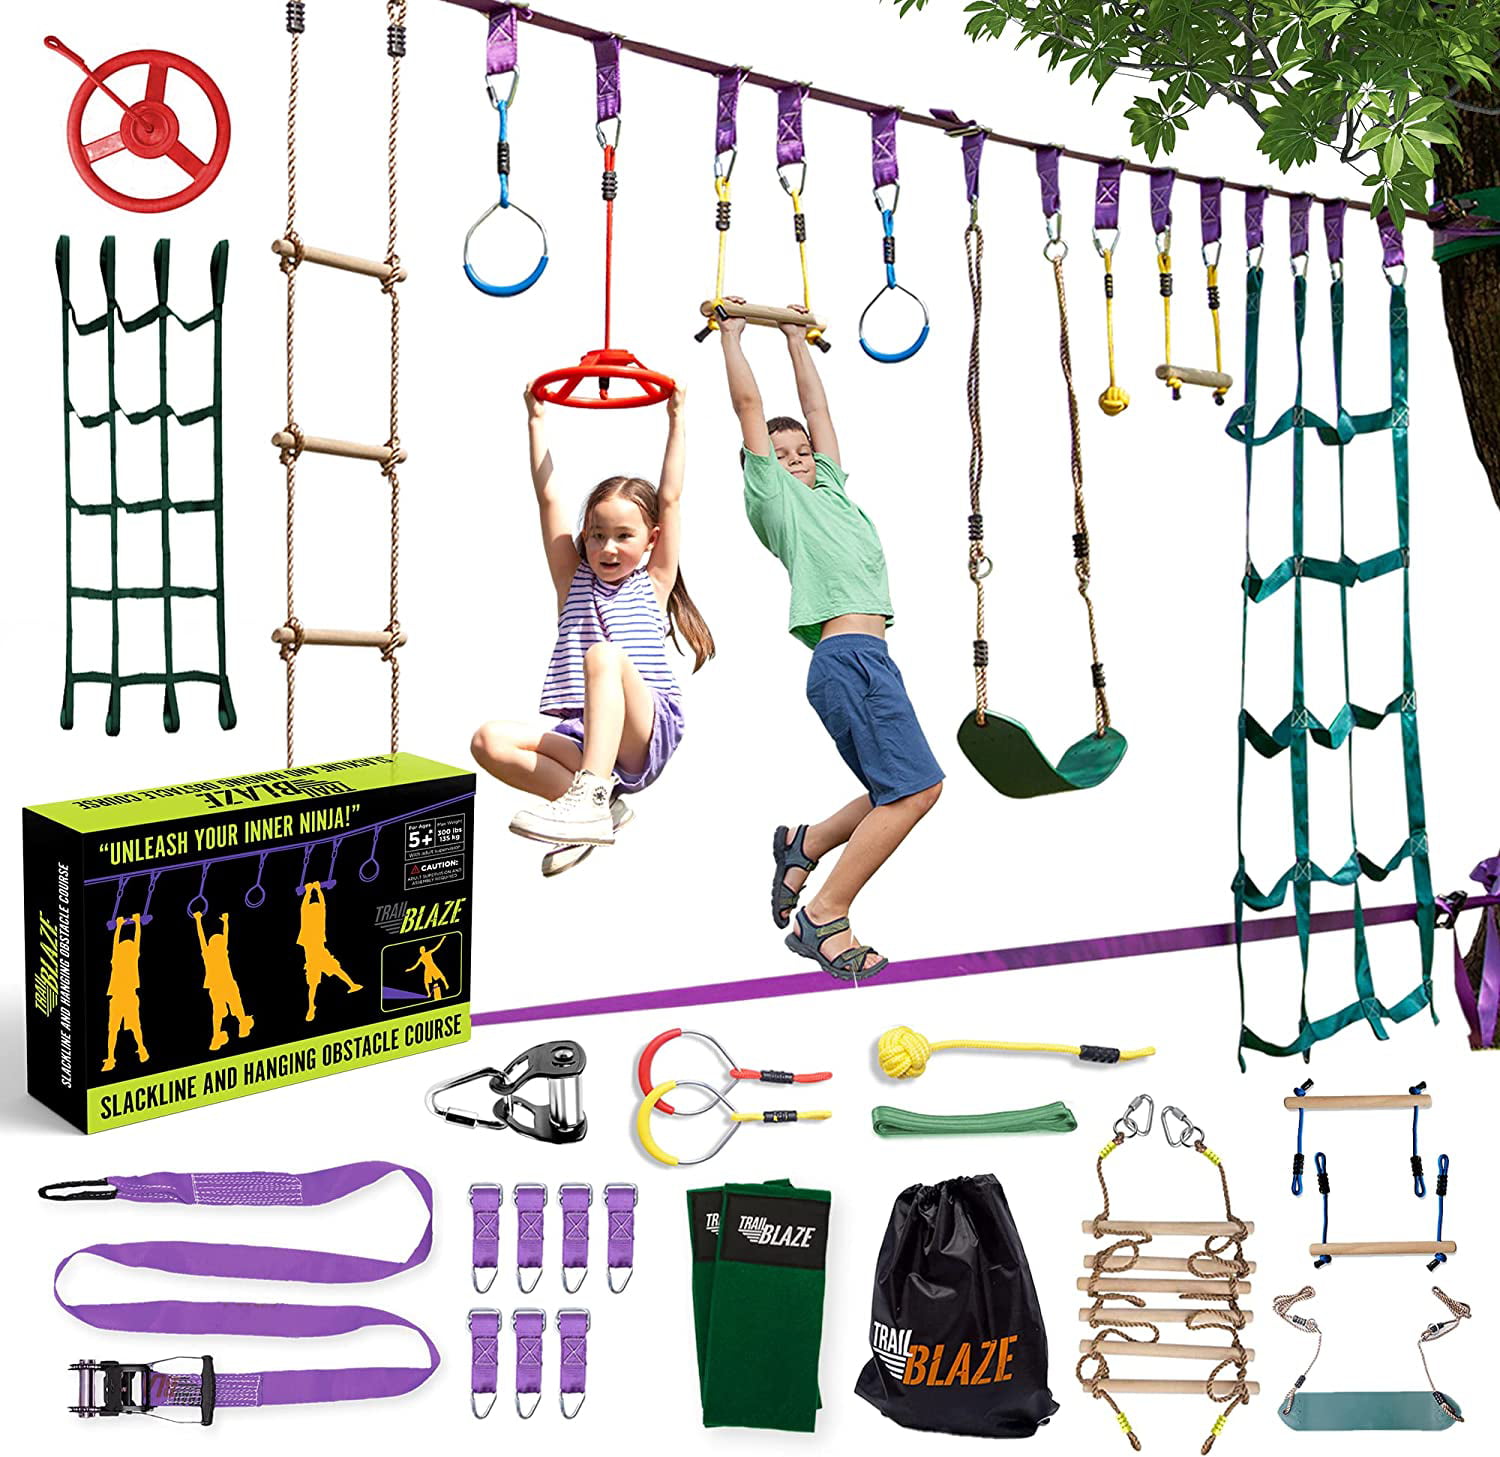 Monkey Bars 300LB Weight Capacity Tree Swing CHIMPRUSH Blue Ninja Obstacle Course Metal Wheel with Buckle Strap Set Ninja Warrior Obstacle Course for Kids Ages 3+ Outdoor Swing Set Accessories 